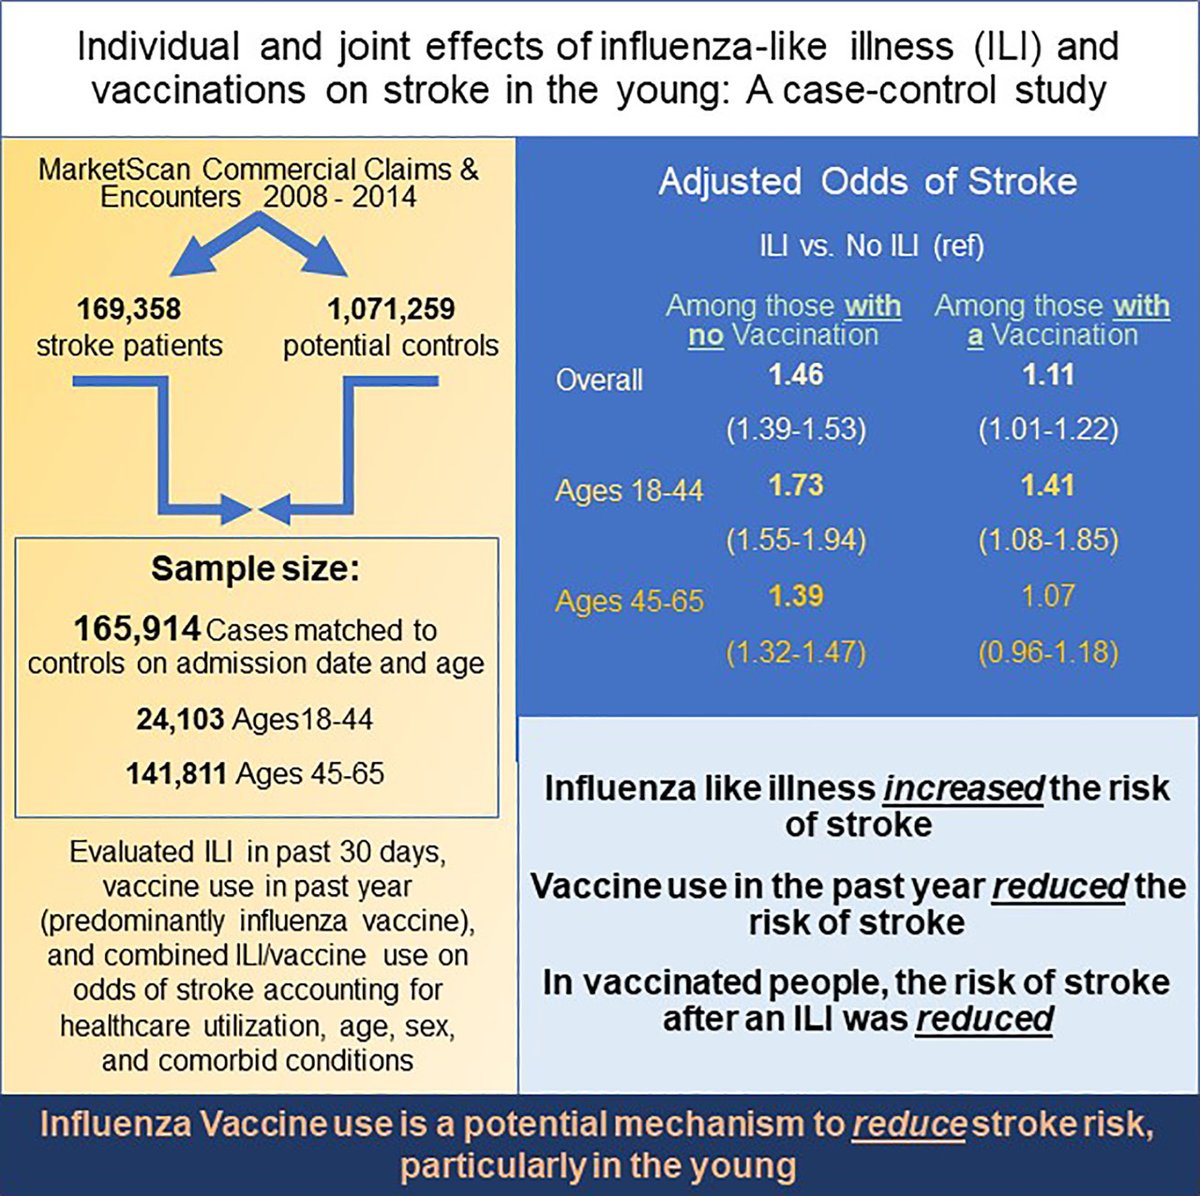 #BloggingStroke: In this blog post, @asharobeam discusses #Stroke article 'Individual and Joint Effects of Influenza-Like Illness and Vaccinations on Stroke in the Young' ahajrnls.org/3SgYS9b Check out the article ahajrnls.org/3RsW3Tq @MitchElkind @bernardchangMD @akboehme